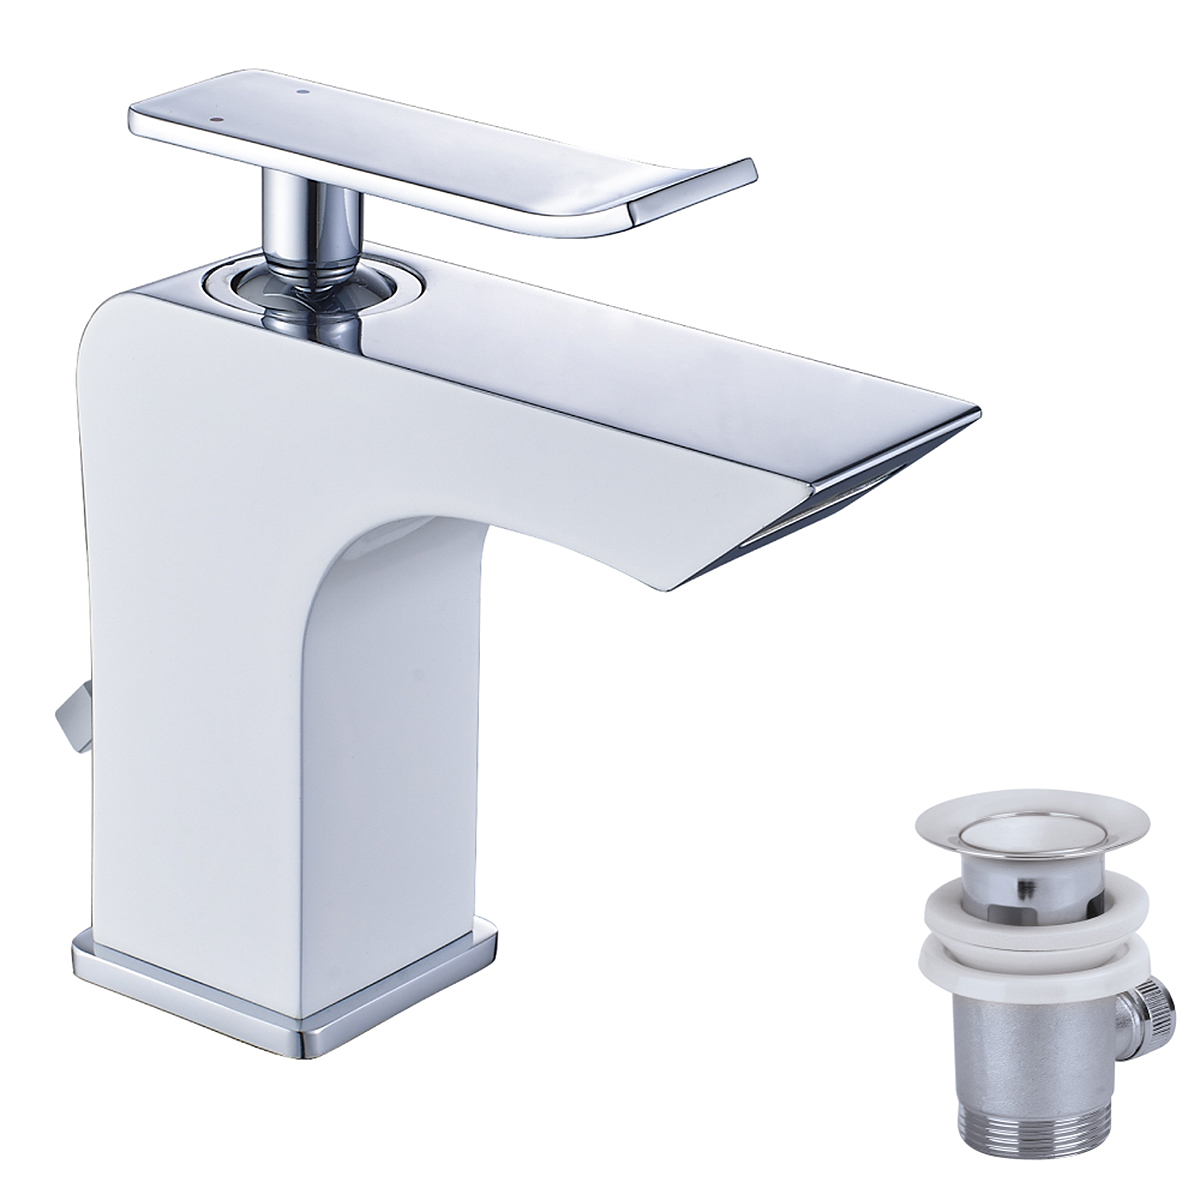 LM5806CW Washbasin faucet
with waterfall spout